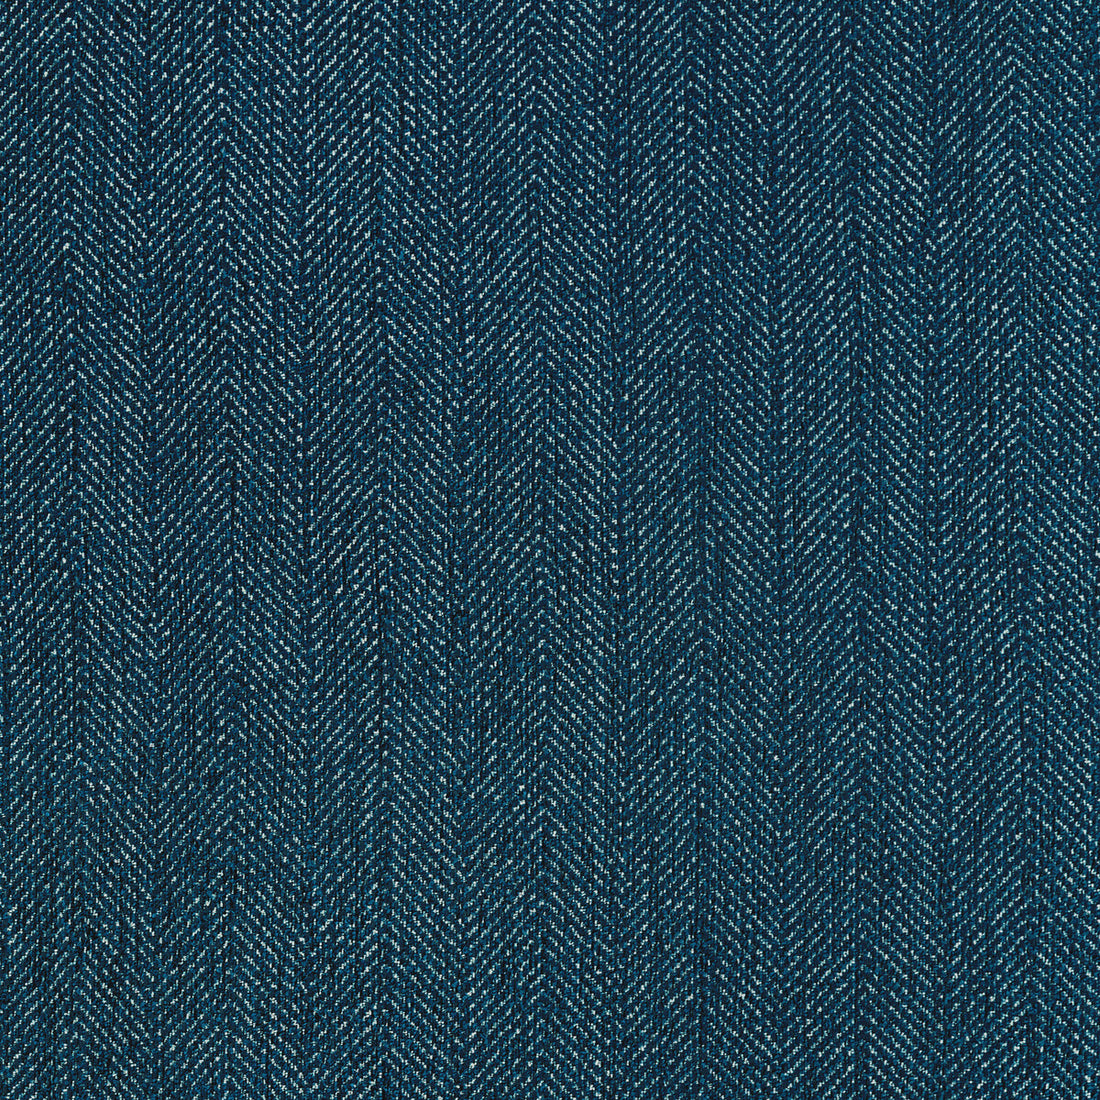 Healing Touch fabric in blue skies color - pattern 36389.51.0 - by Kravet Design in the Crypton Home - Celliant collection